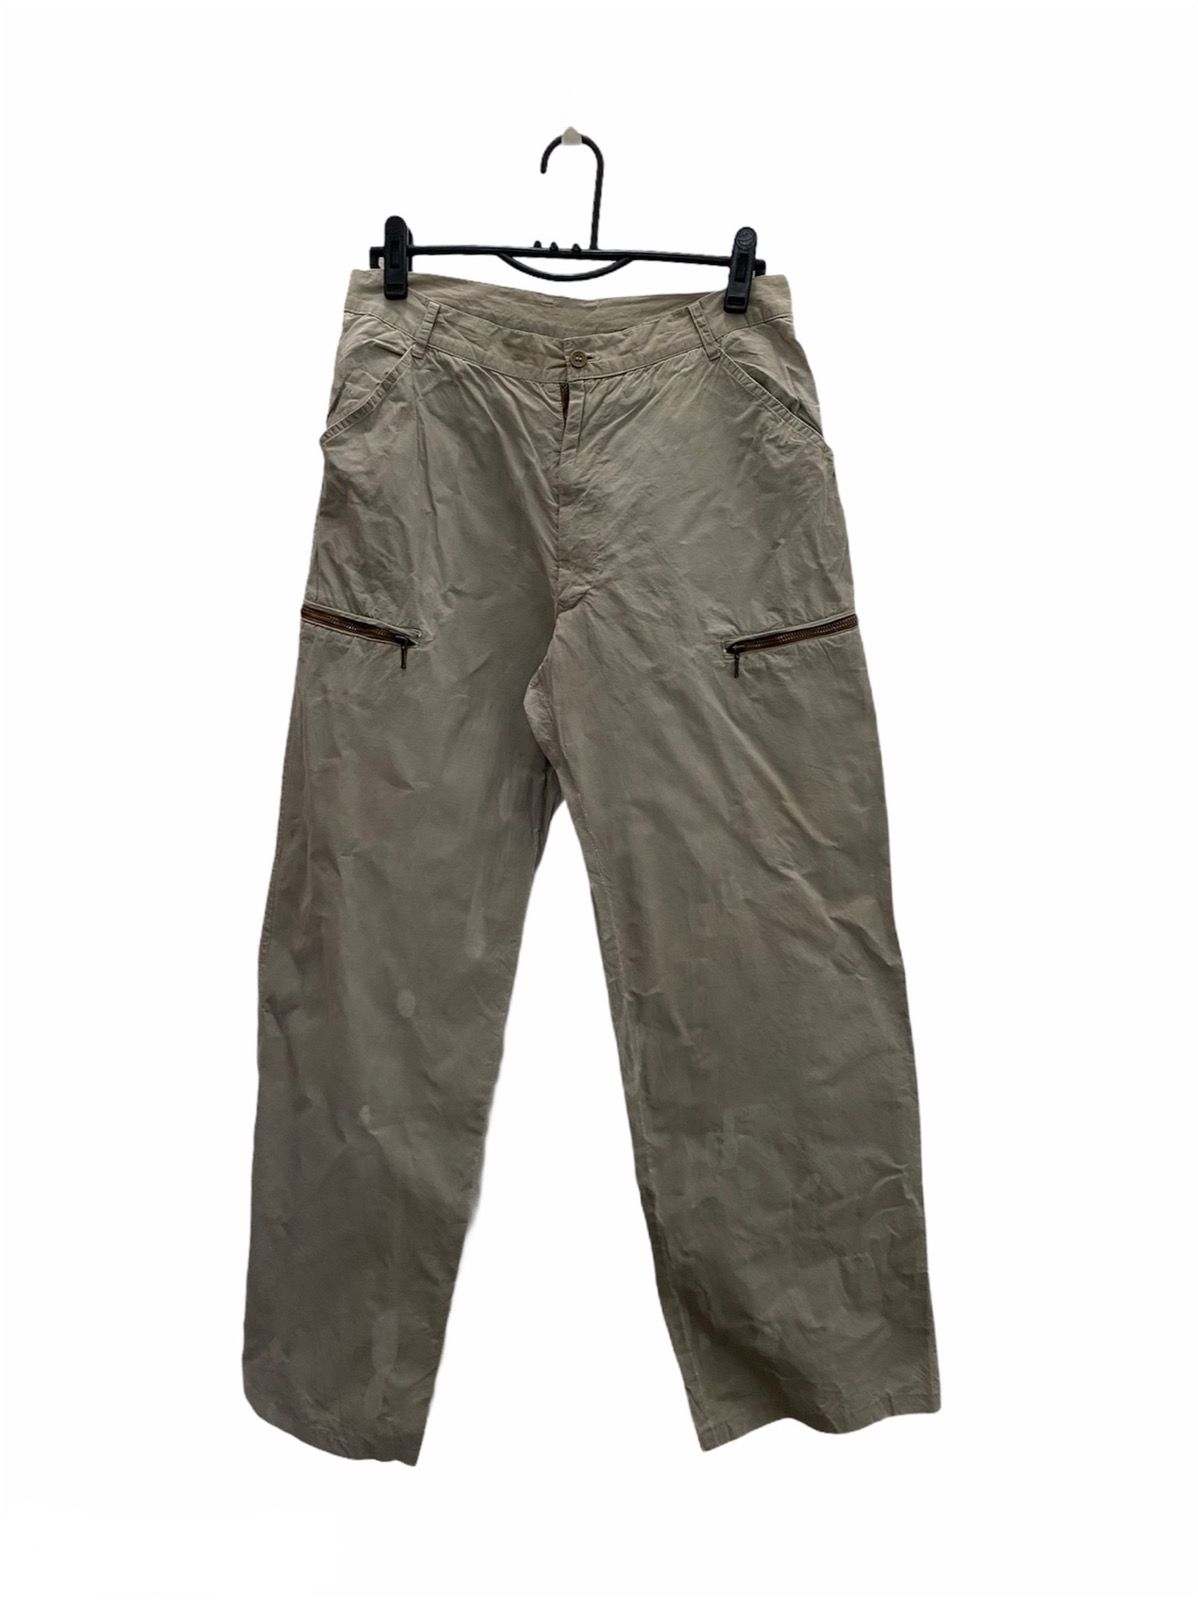 Issey Miyake Tete Home Cargo Pant- Large Size | Grailed